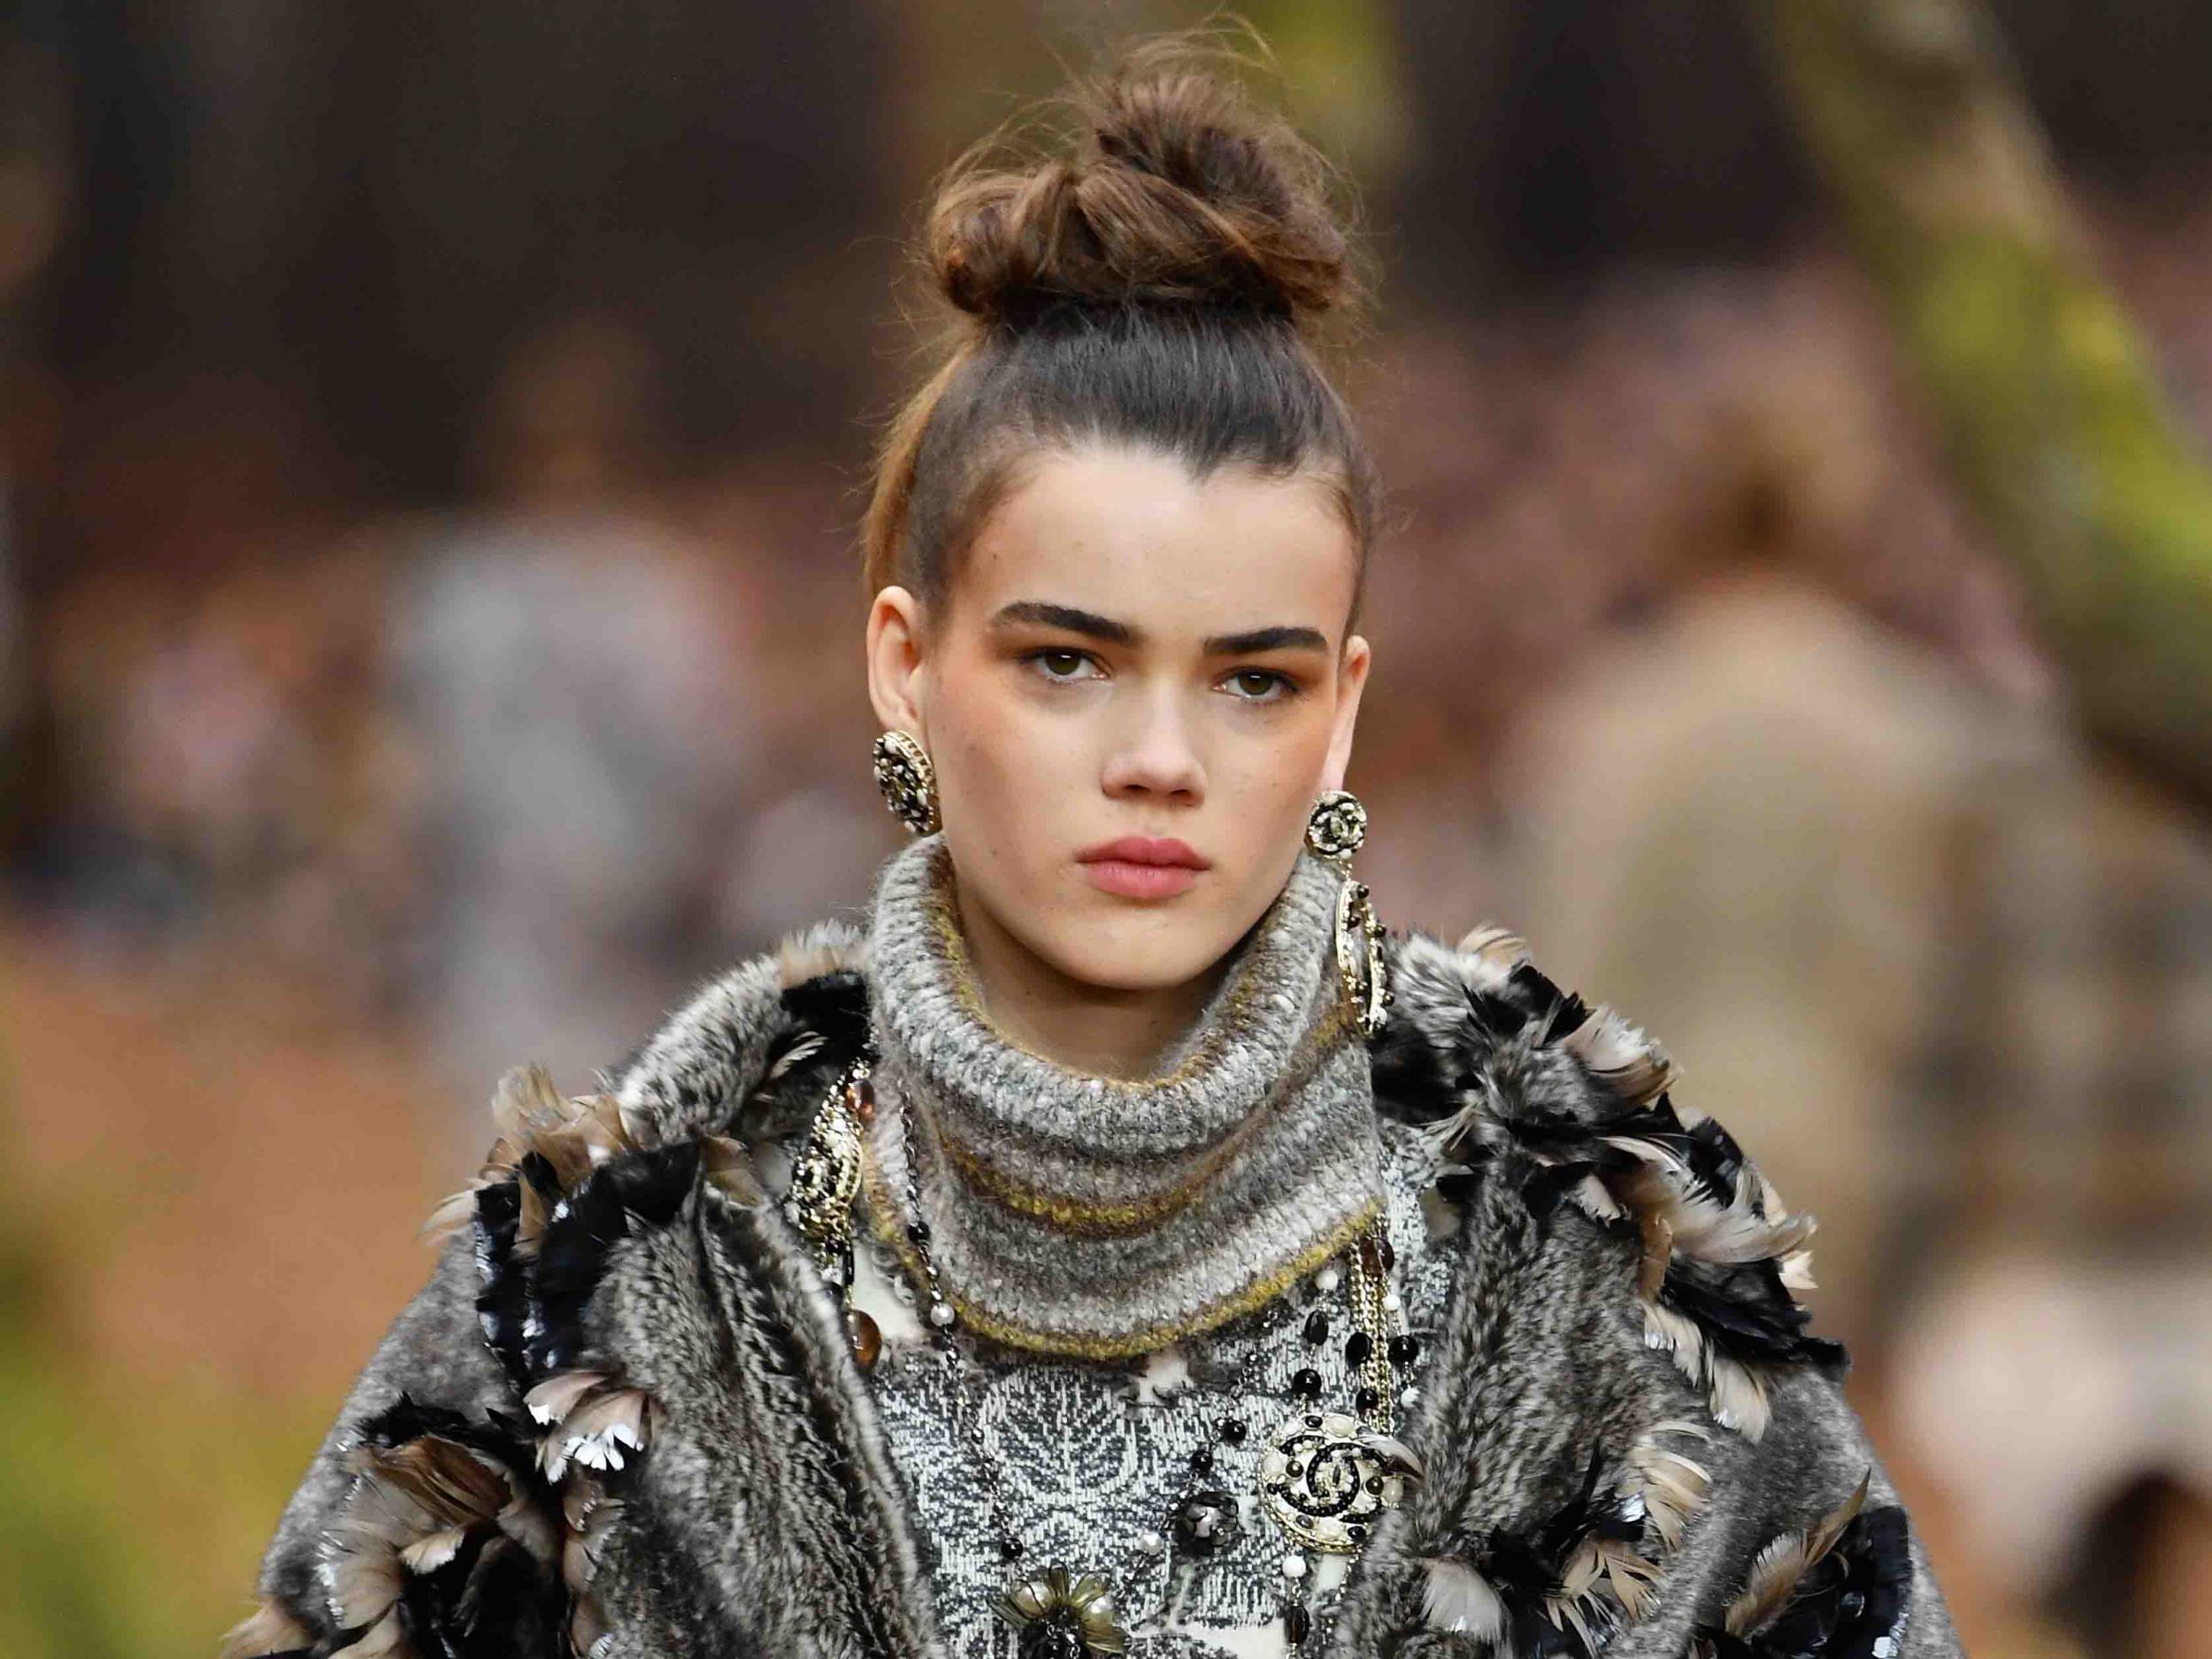 Chanel presented a modern take on the oldschool chignon for autumn/winter 2018